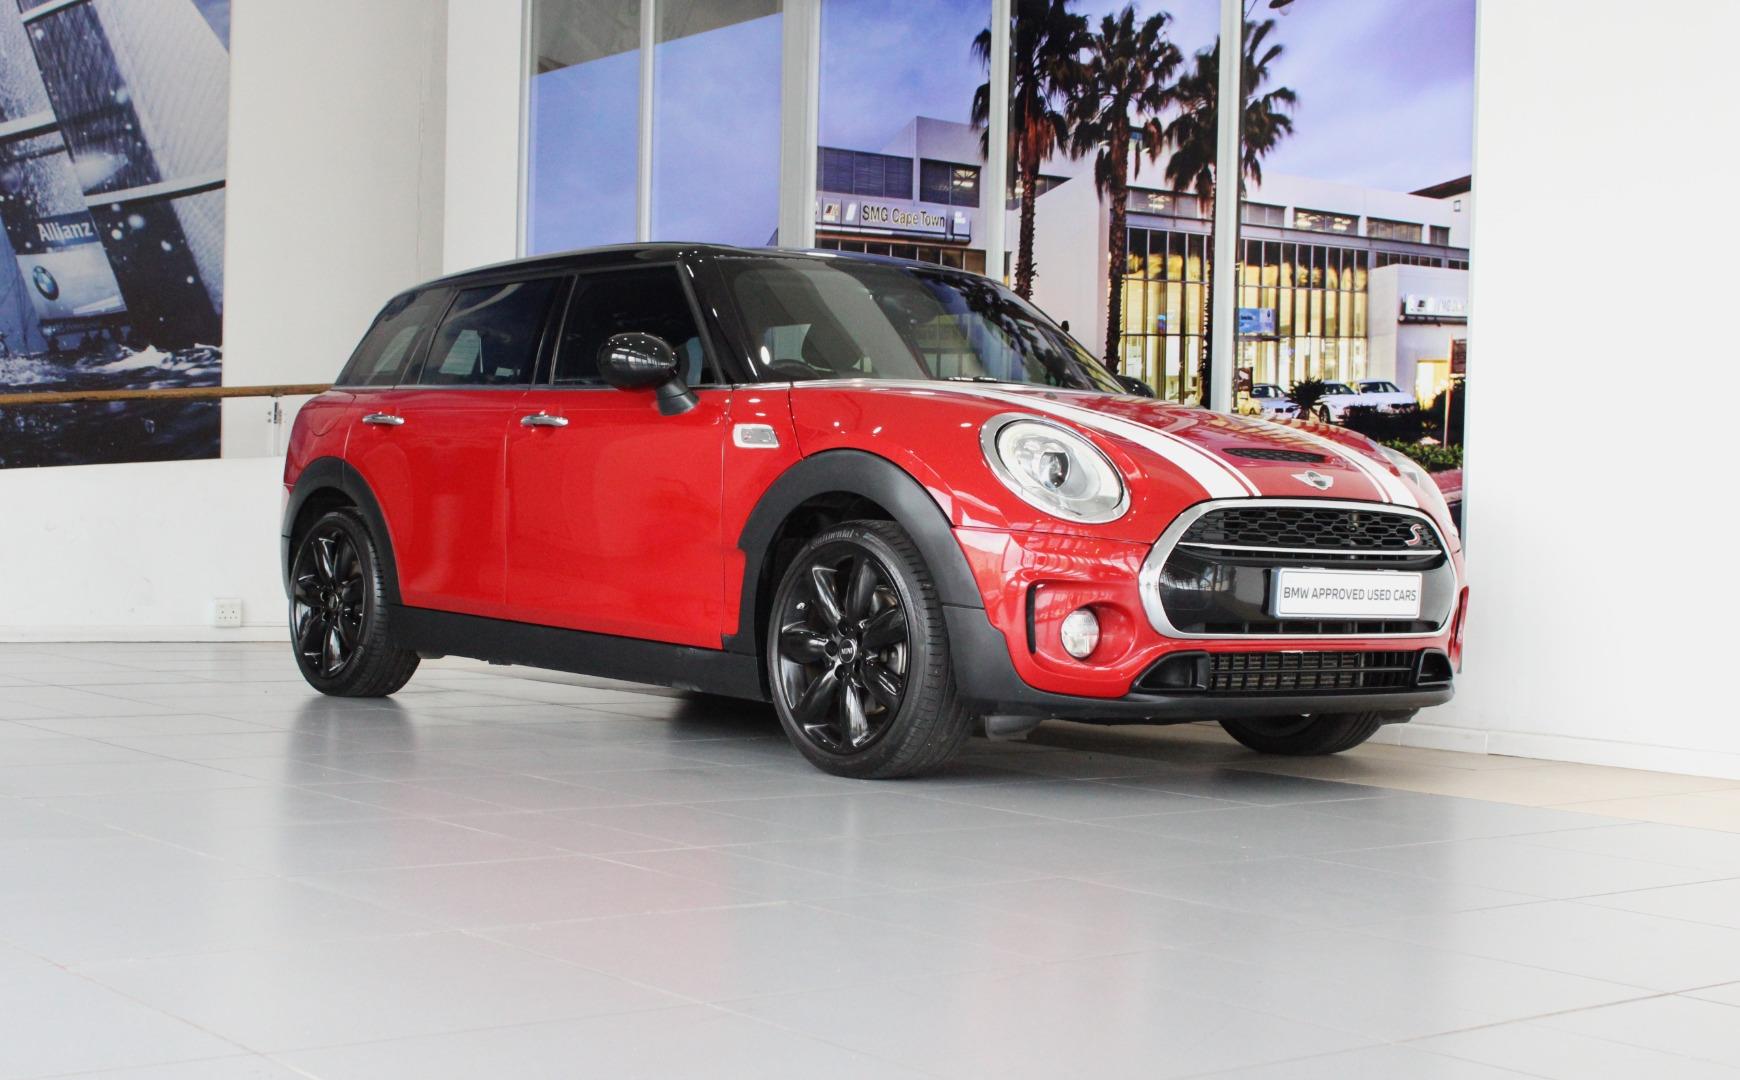 2016 MINI COOPER S CLUBMAN AT  for sale - SMG12|USED|115286